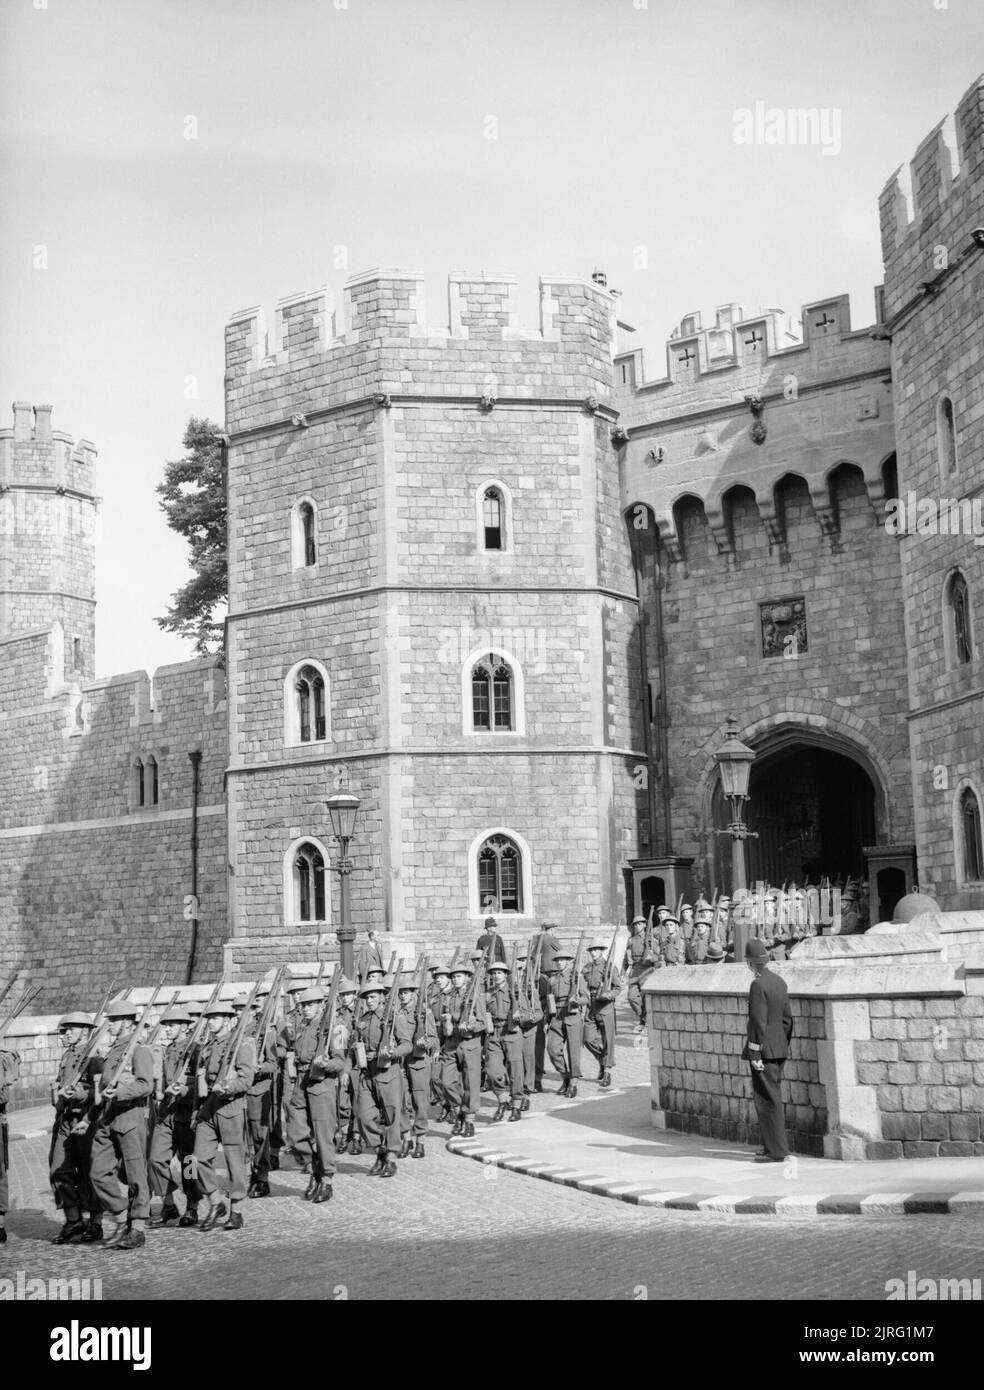 The Castle Guard, formed from members of the training battalion, Grenadier Guards, leaving the main entrance of Windsor Castle on the way to Victoria Barracks, 30 June 1940. The Castle Guard, formed from members of the training battalion, Grenadier Guards, leaving the main entrance of Windsor Castle on the way to Victoria Barracks in Windsor, 30 June 1940. Stock Photo